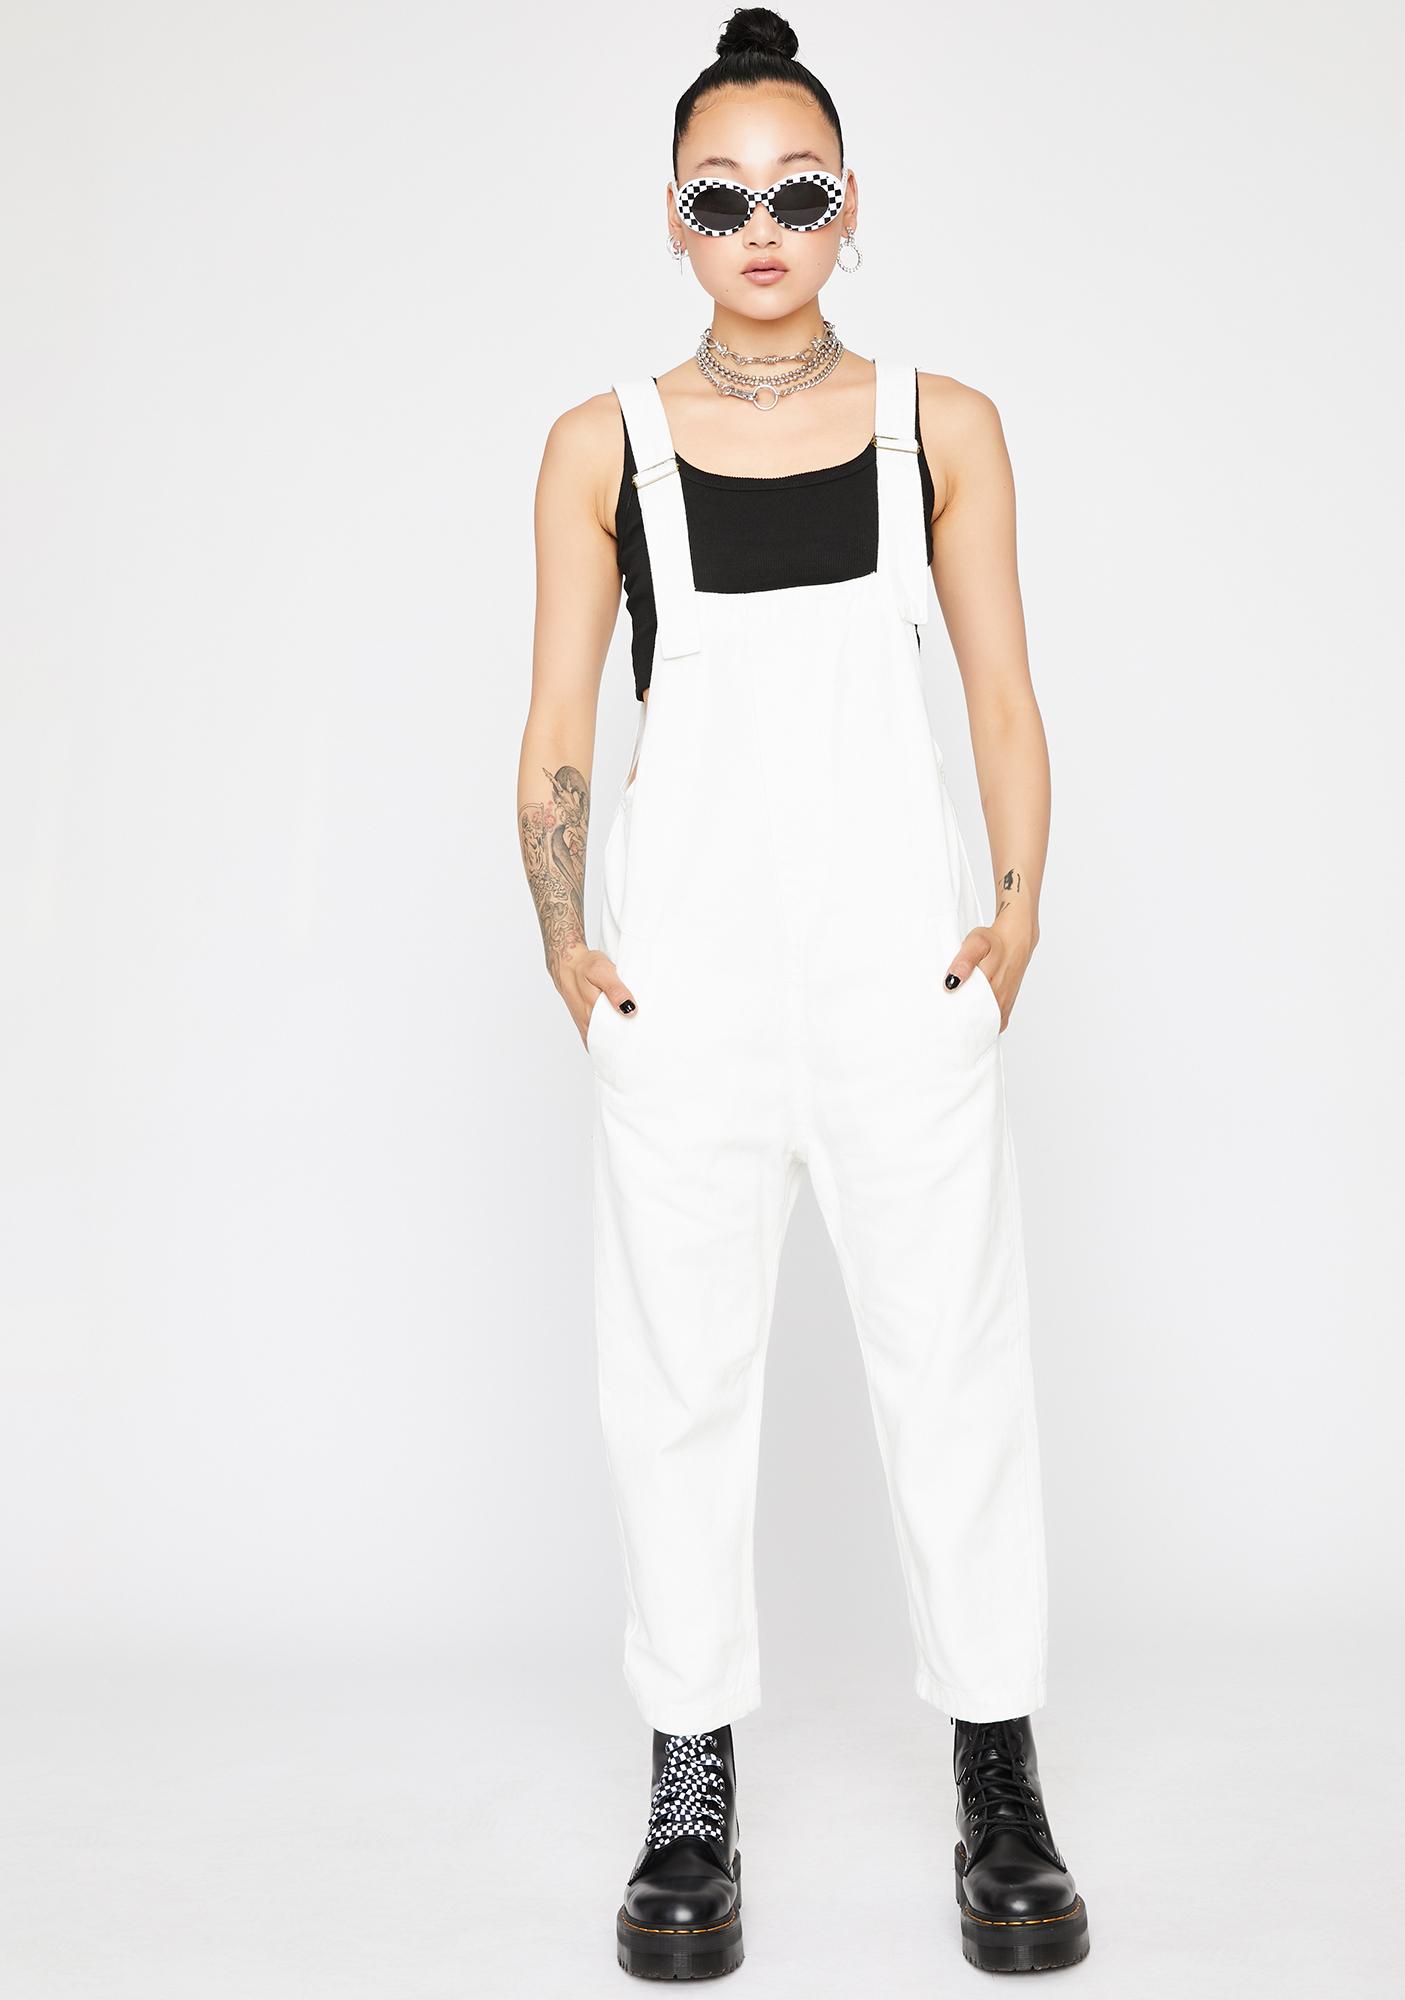 white baggy overalls